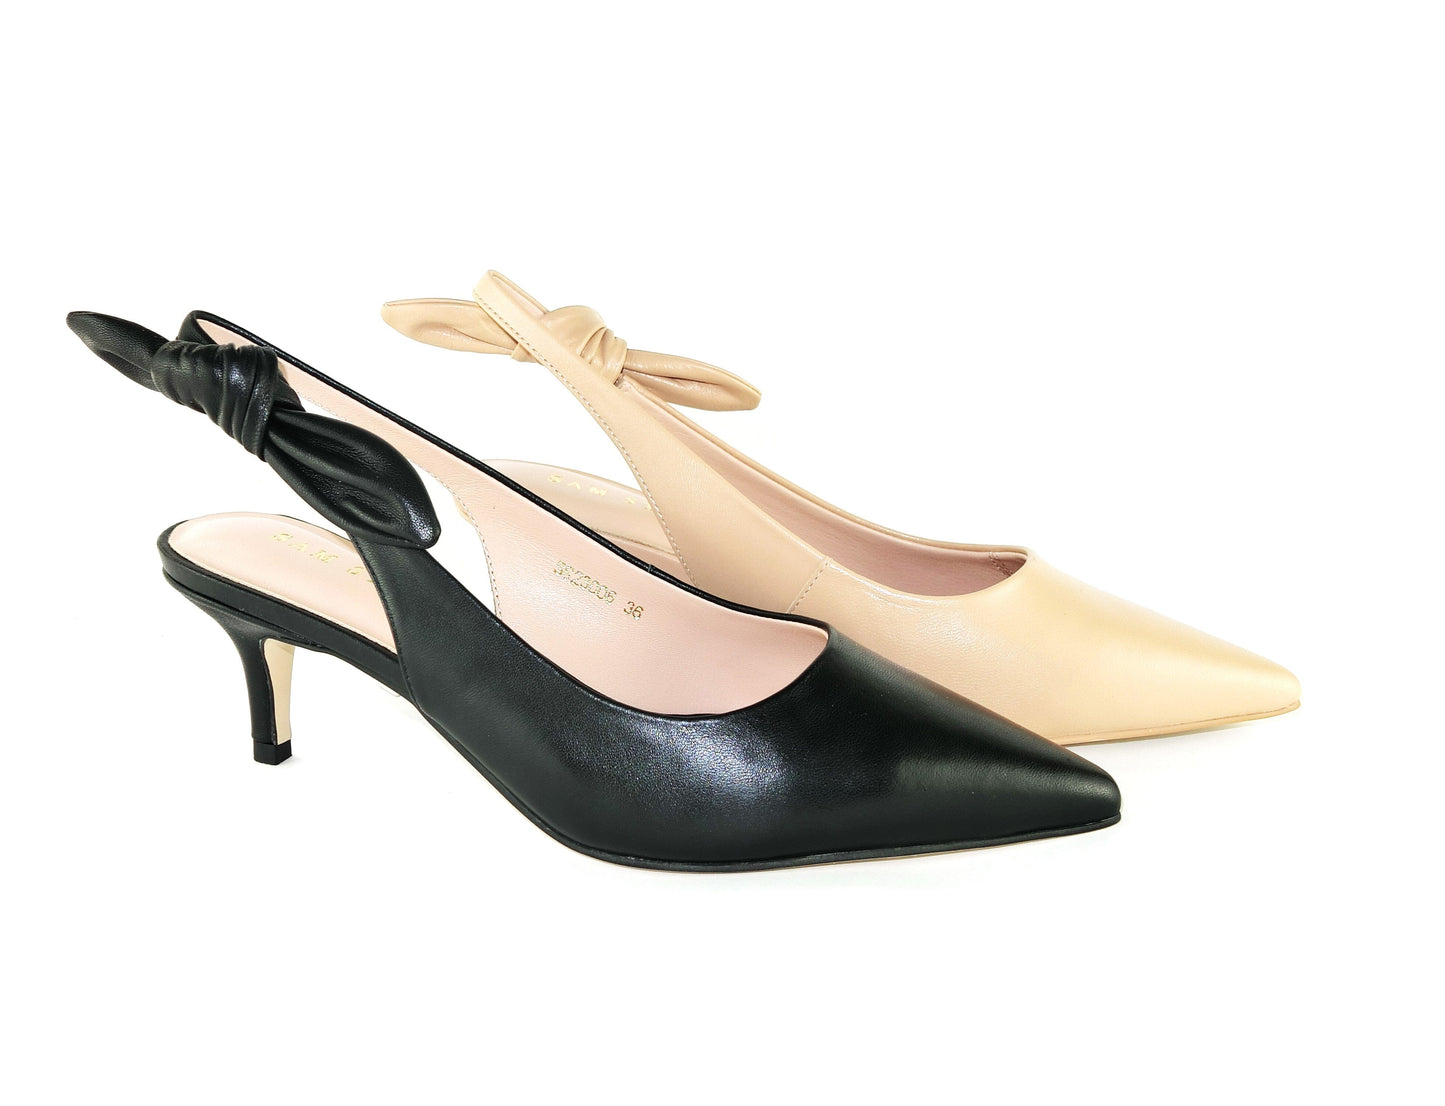 SS23006 Leather court shoes with sling back design (removable bow) Black and Beige ladies shoes Sam Star shoes 